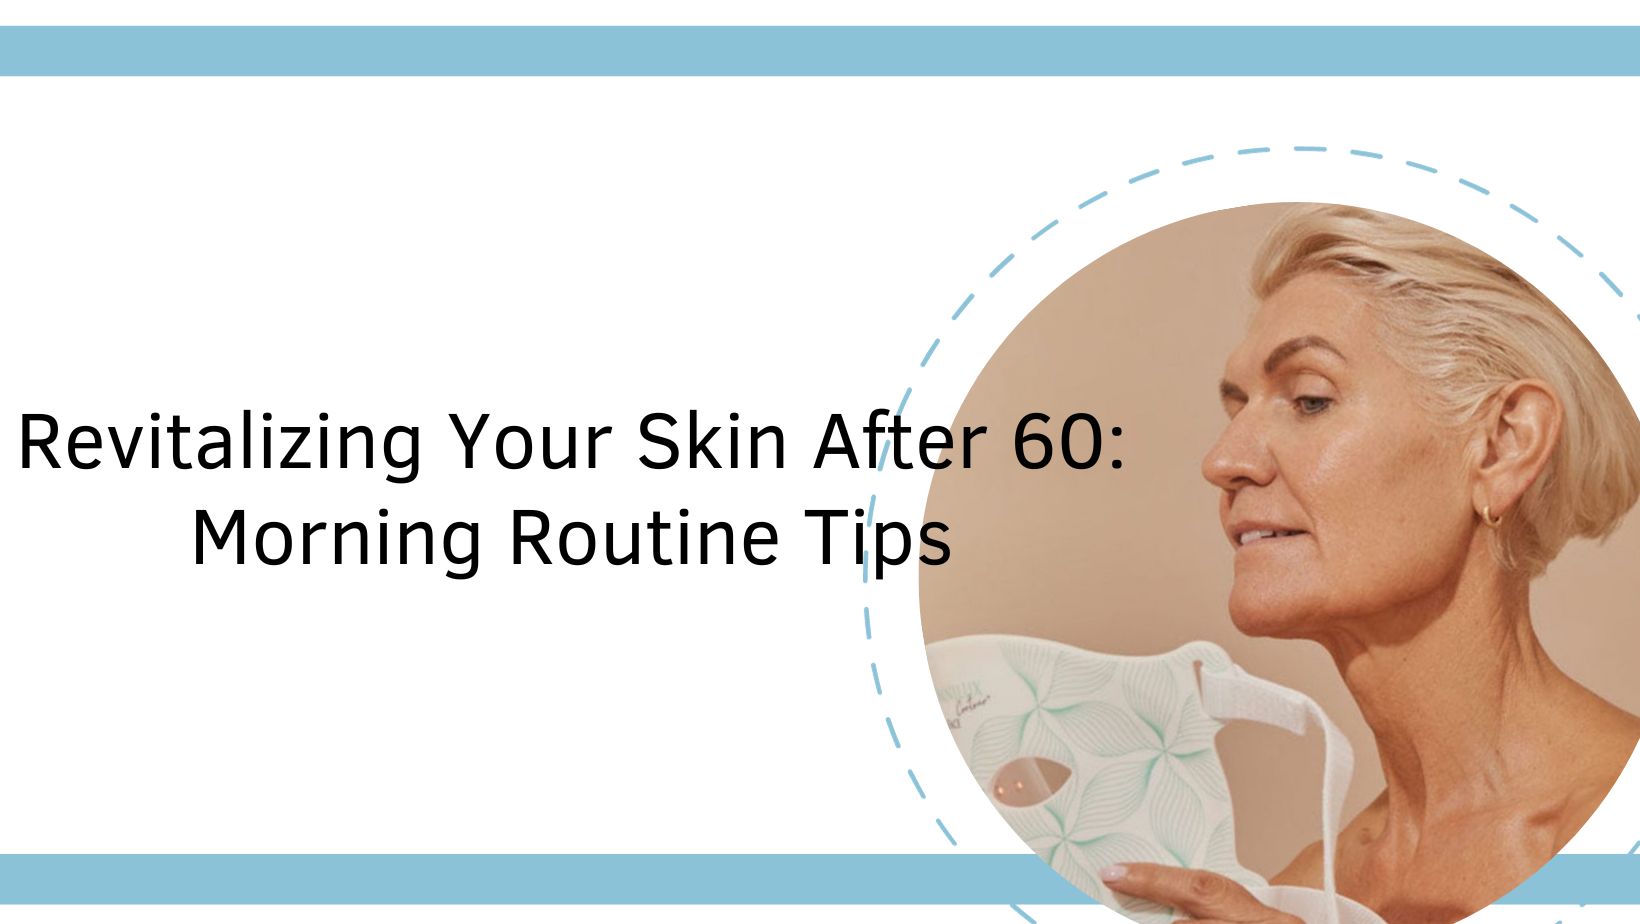 Revitalizing Your Skin After 60 Morning Routine Tips